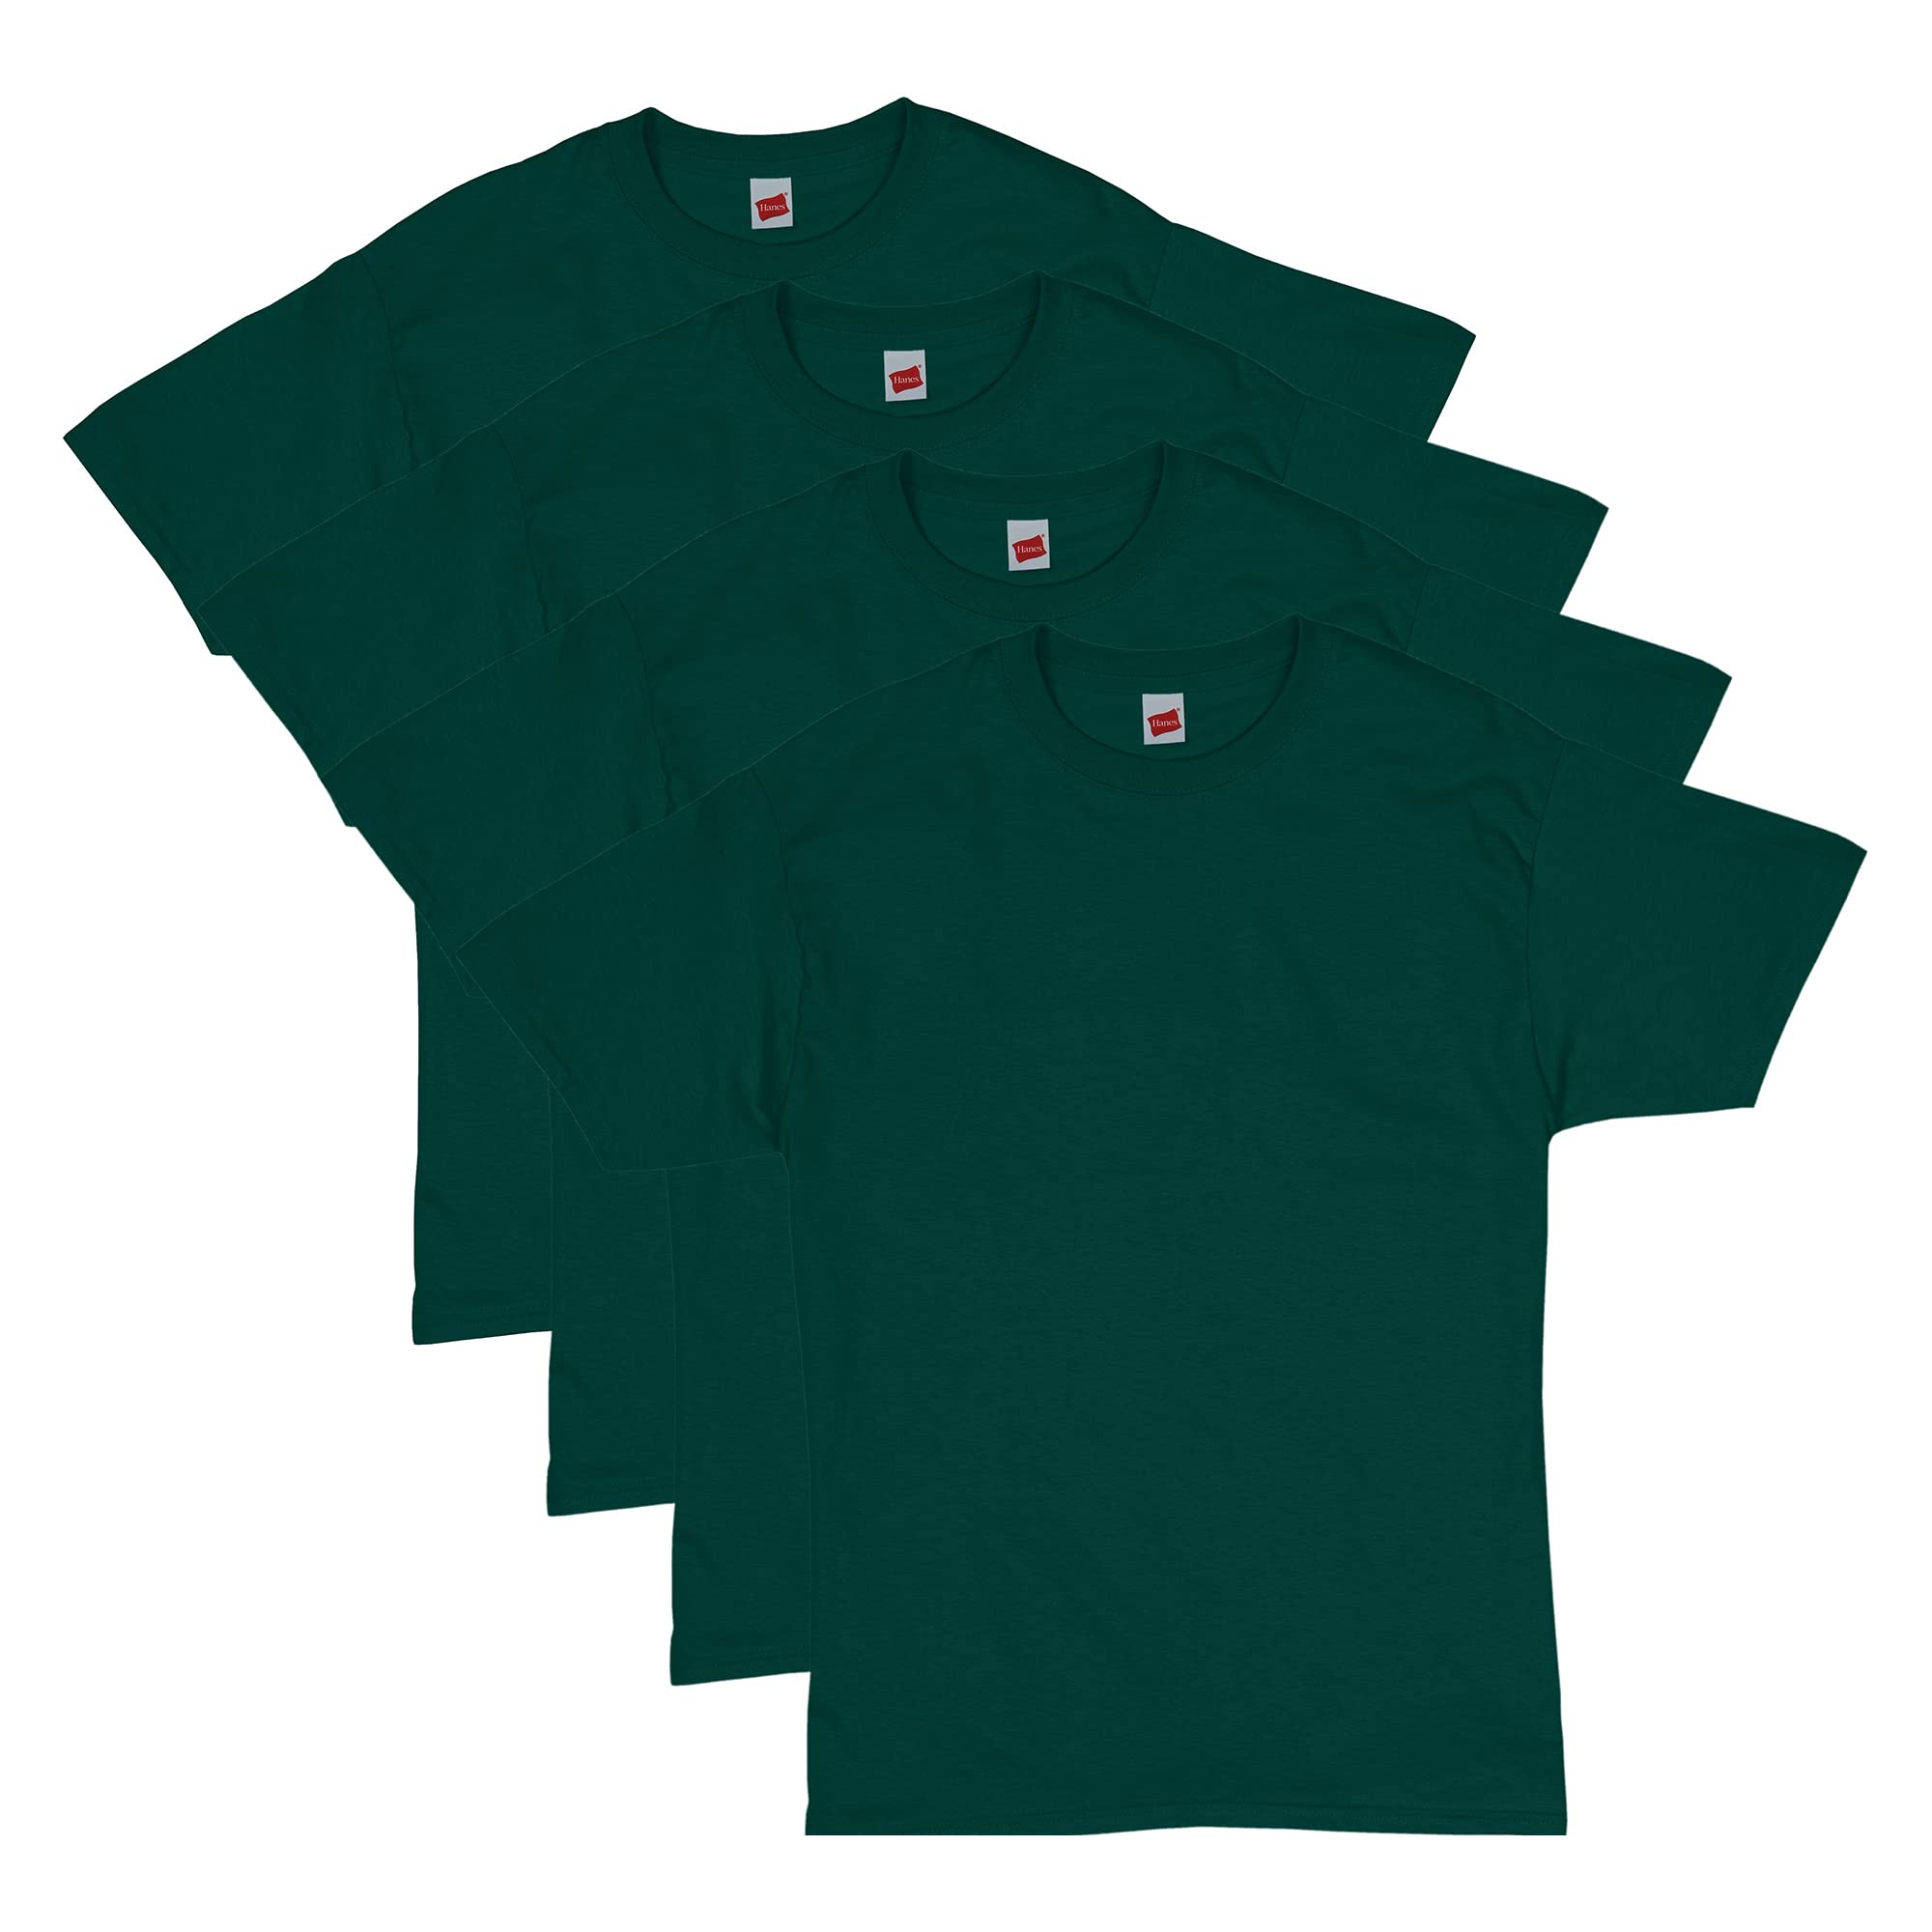 Hanes Men's Essentials T-shirt Pack, Crewneck Cotton T-shirts for Men, 4 Or 6 Pack Available